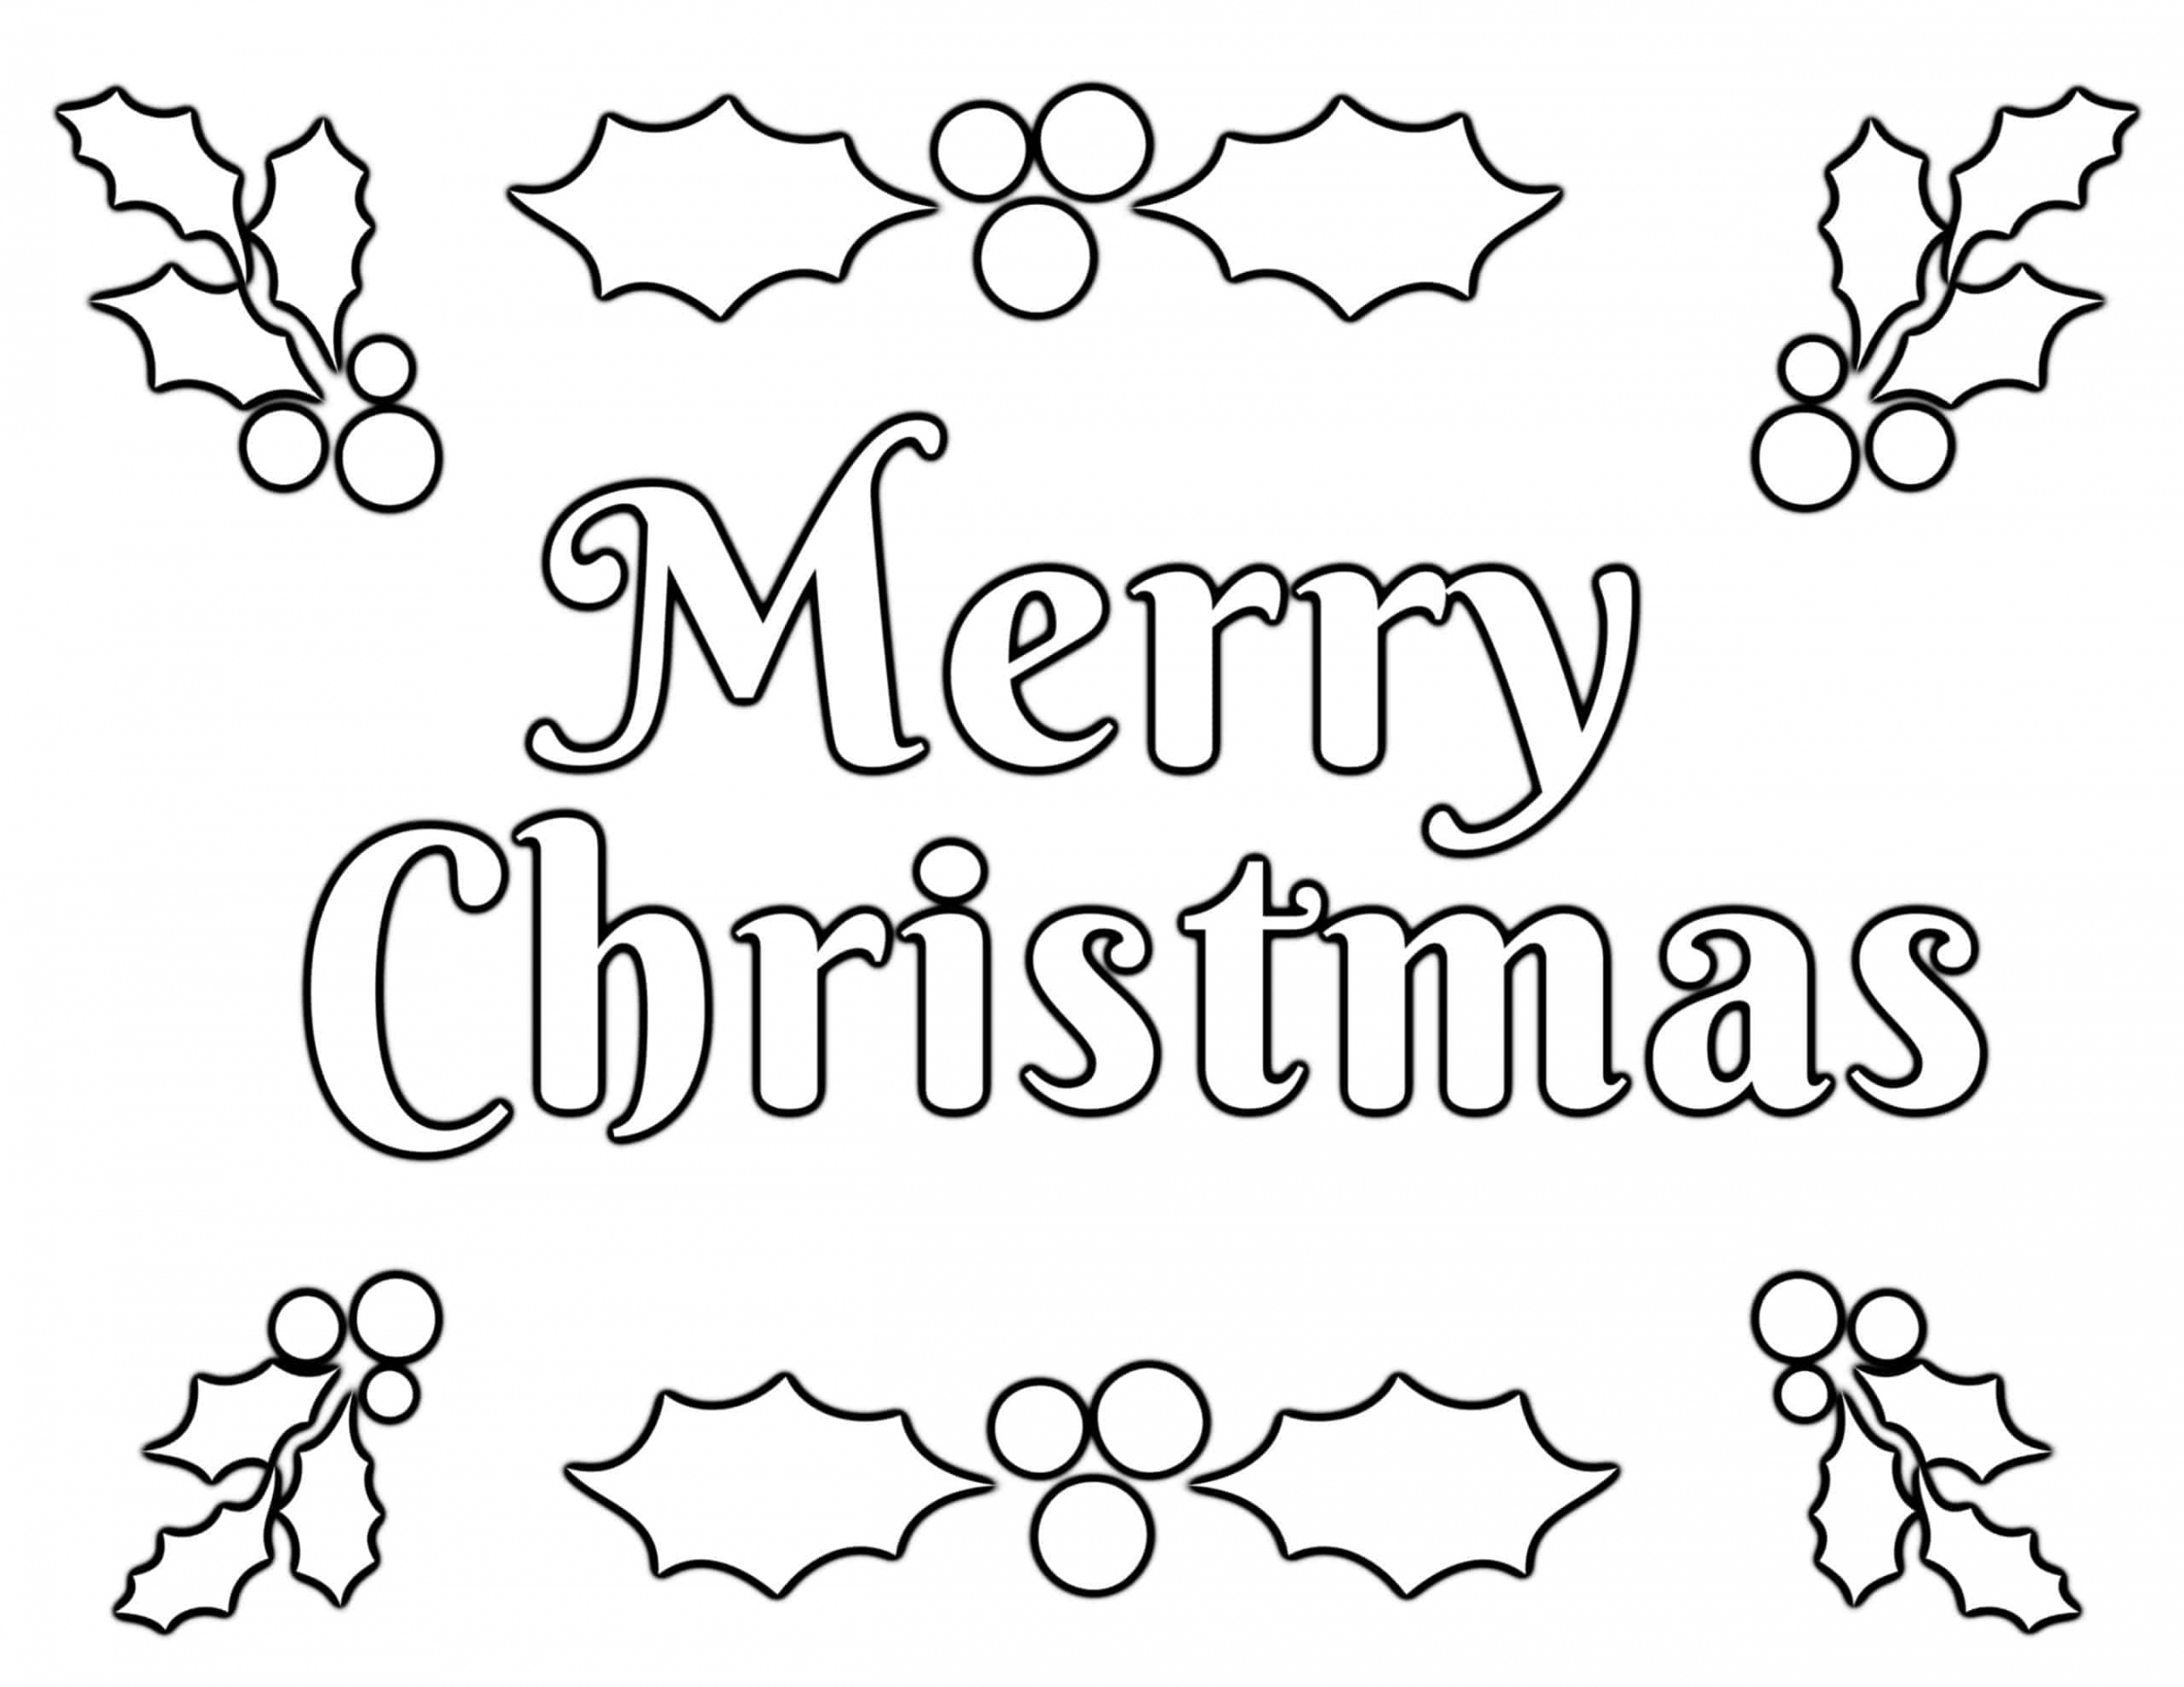 Christmas Coloring Pages Printable Free - Printable - Christmas Coloring Pages for Kids (% FREE) Easy Printable PDF